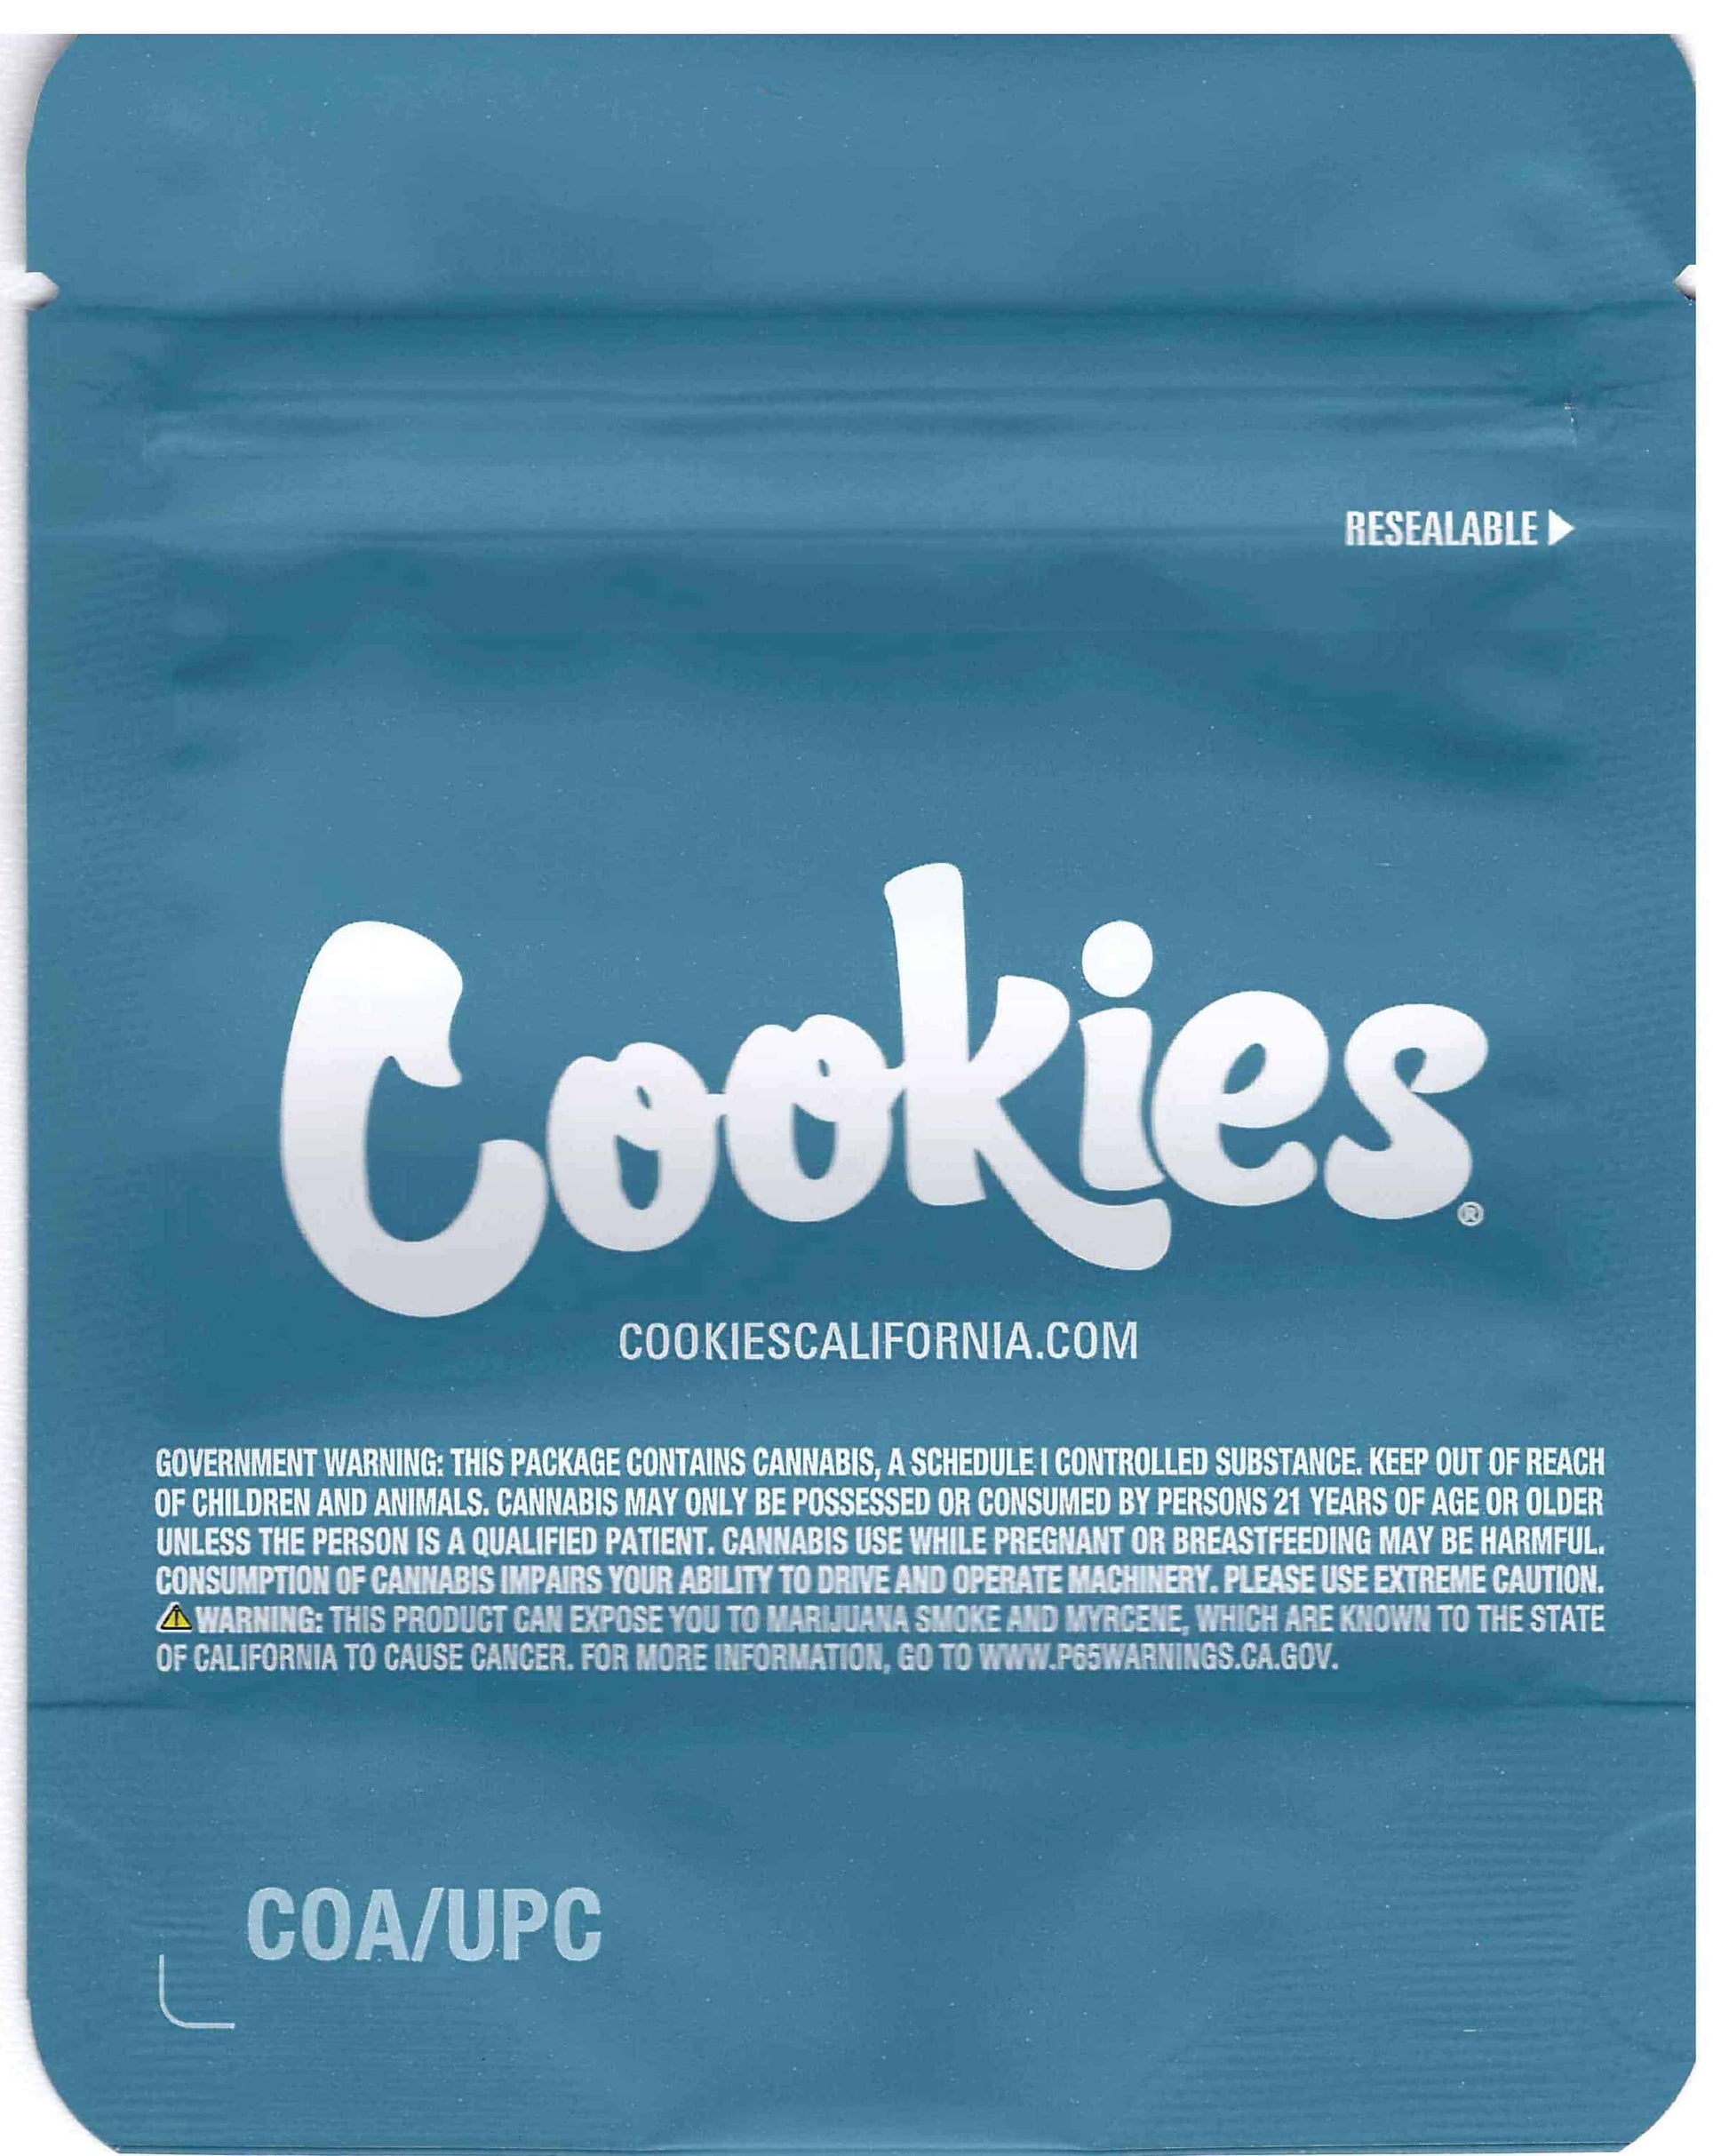 Cookies Mylar Bags 3.5g - Pomelo